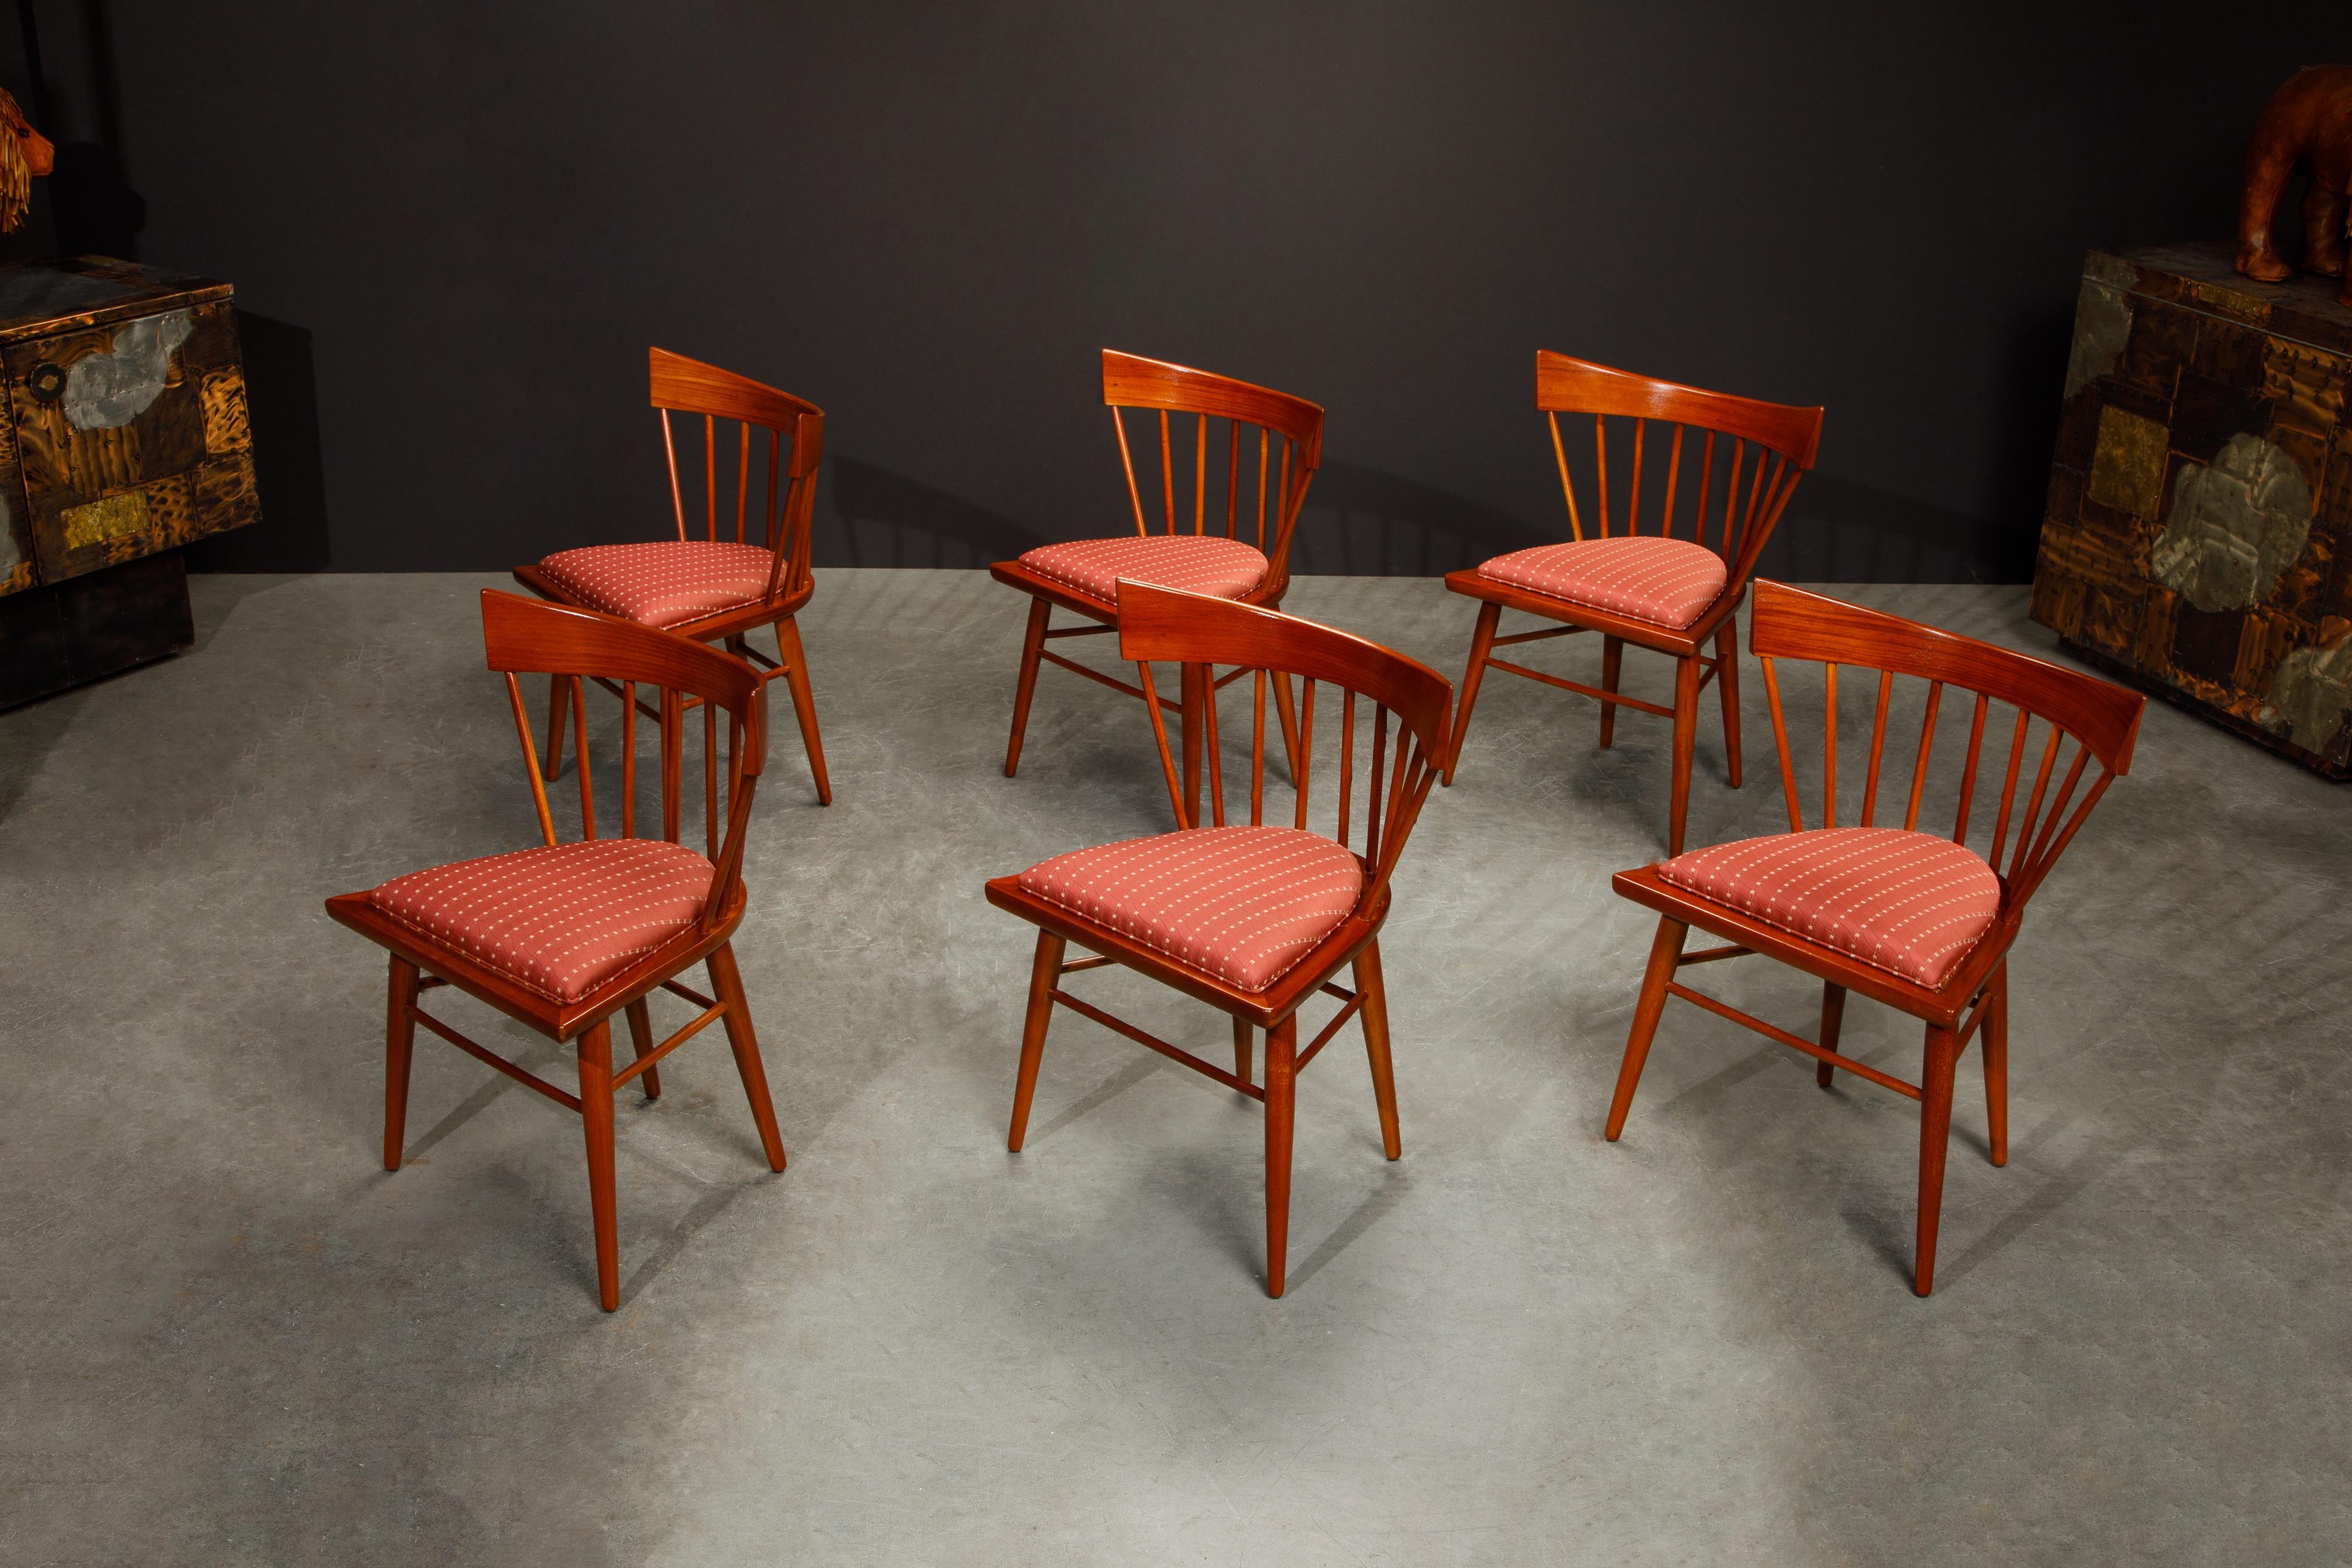 Mid-Century Modern 'Yucatan' Dining Chairs by Edmond Spence for Industria Mueblera, 1960s Signed For Sale